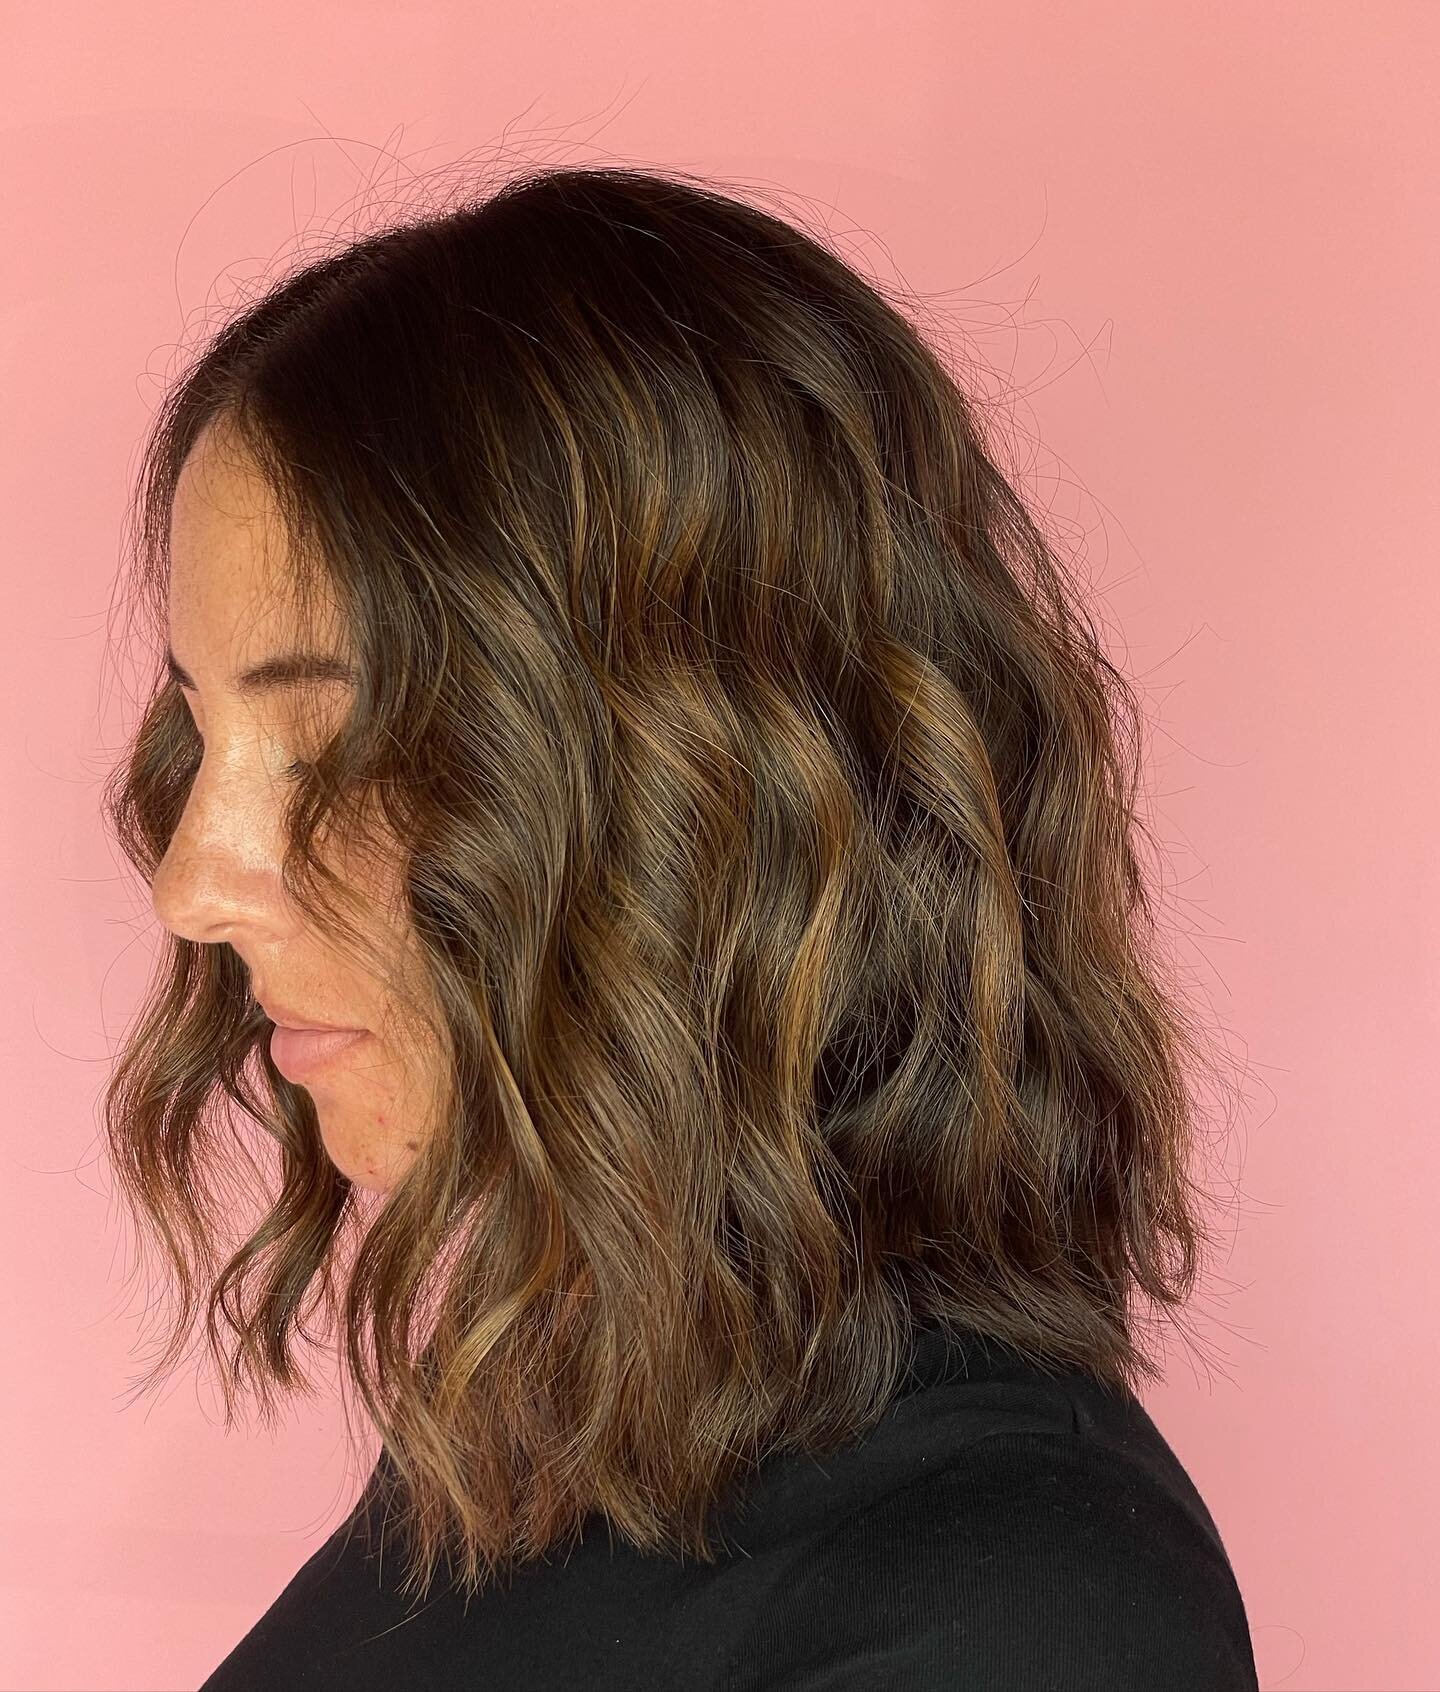 BIG chop and a subtle balayage!
Swipe to see before ➡️
@theboulevardhaircompany